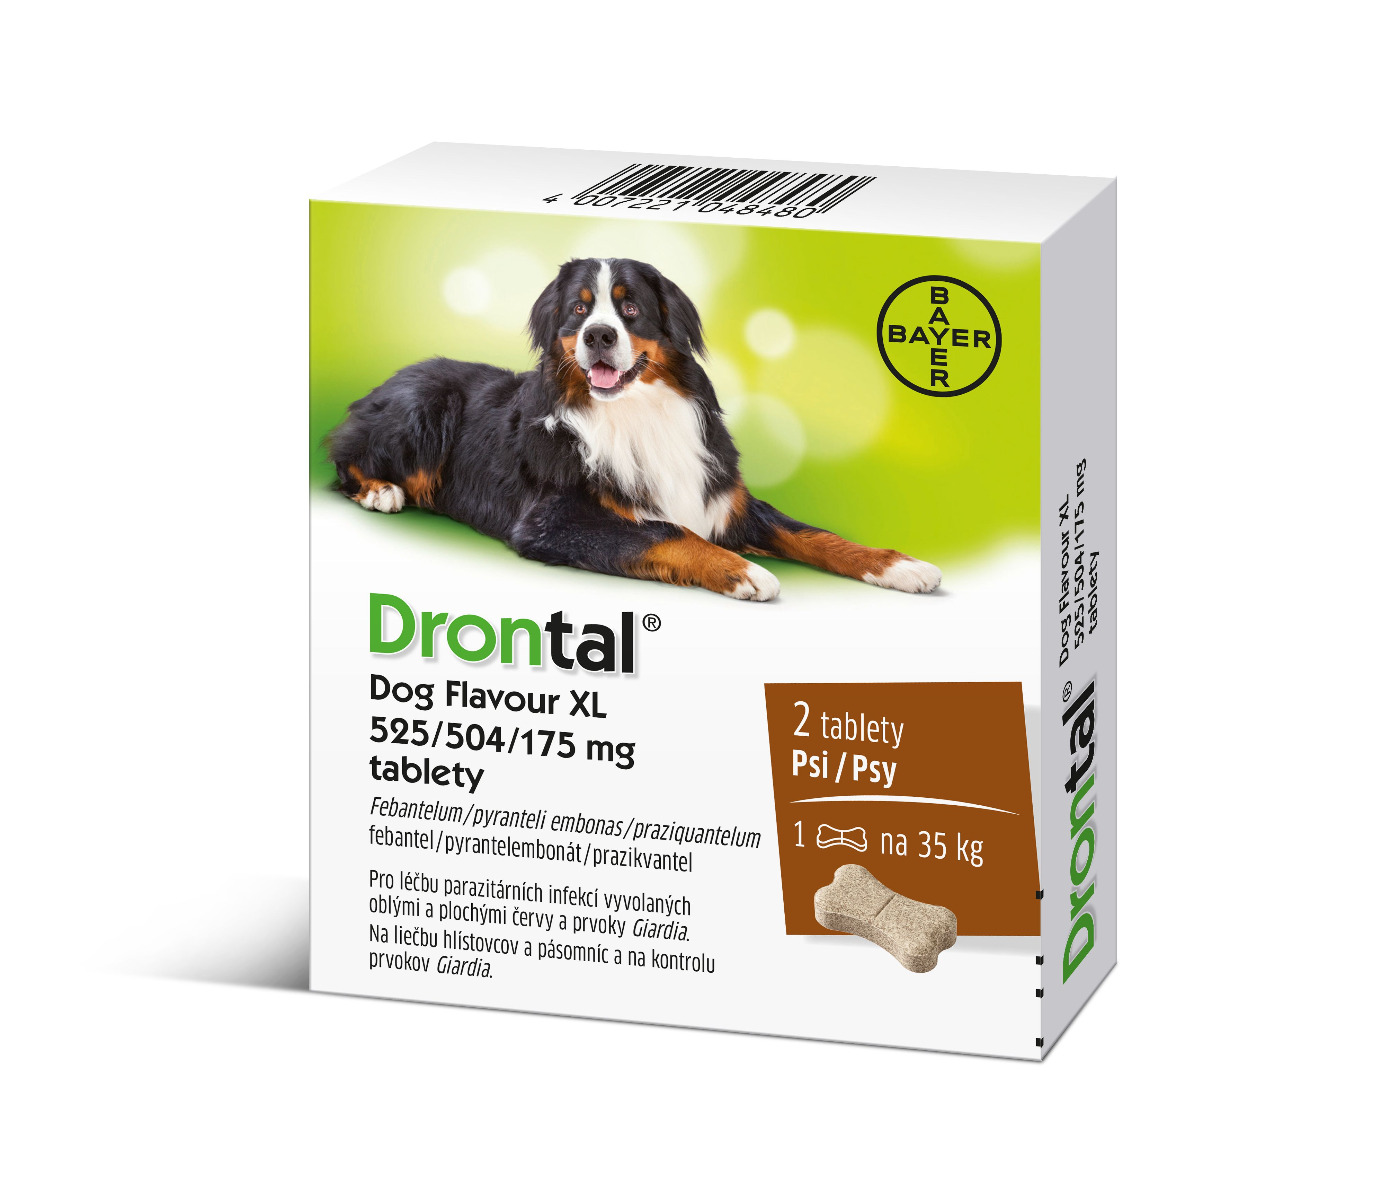 Drontal Dog Flavour XL 525/504/175 mg 2 tablety Drontal